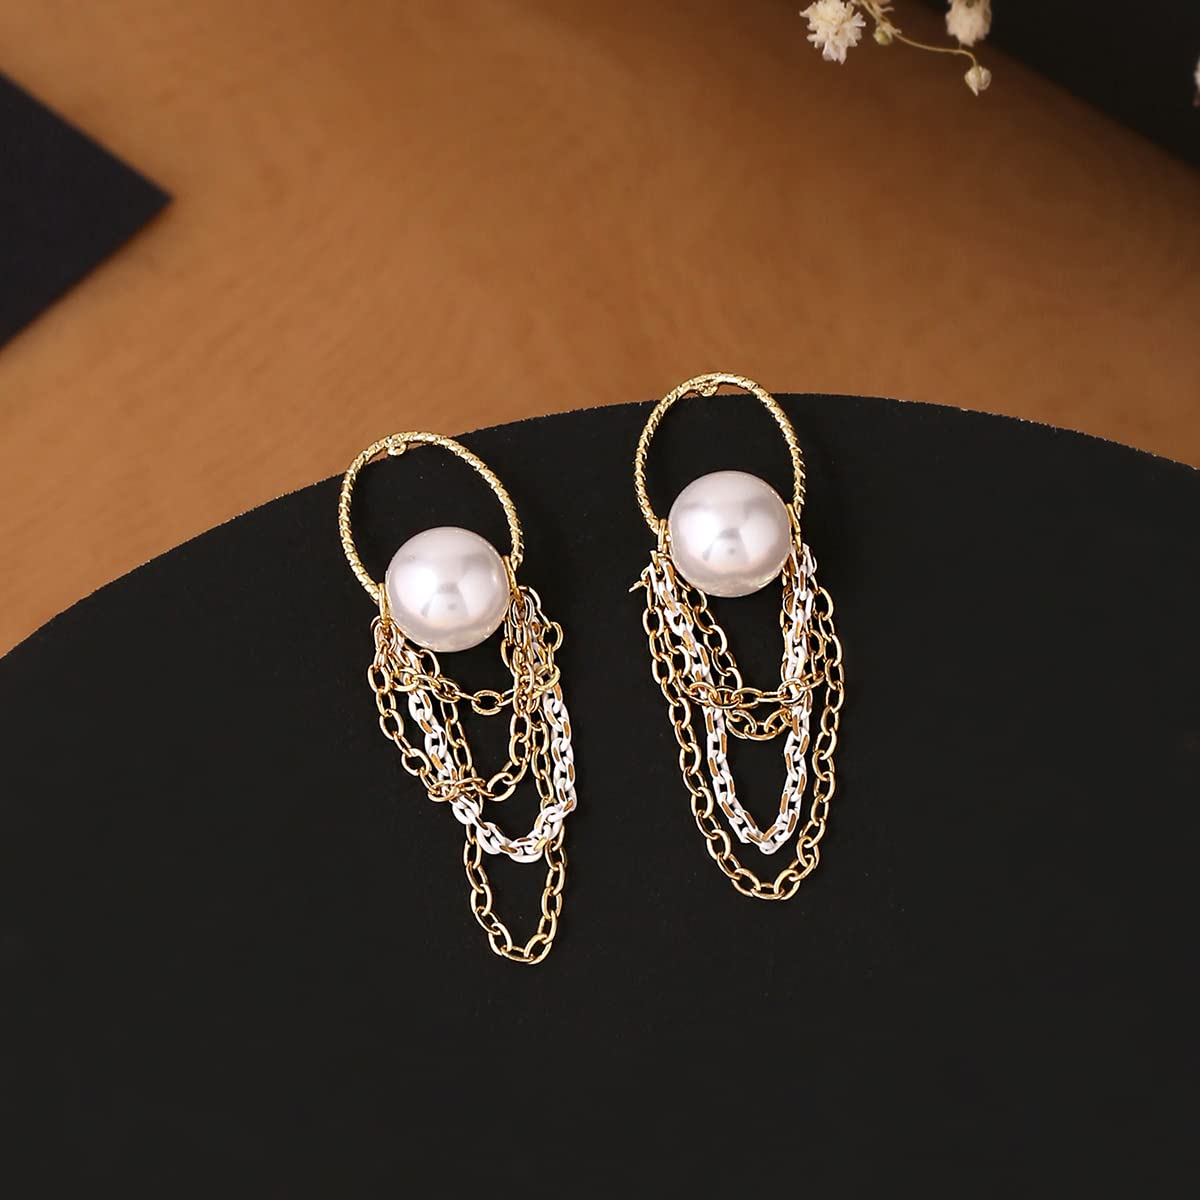 Yellow Chimes Earrings For Women Gold Tone Triple Layered Chain Pearl Stud Drop Earrings For Women and Girls